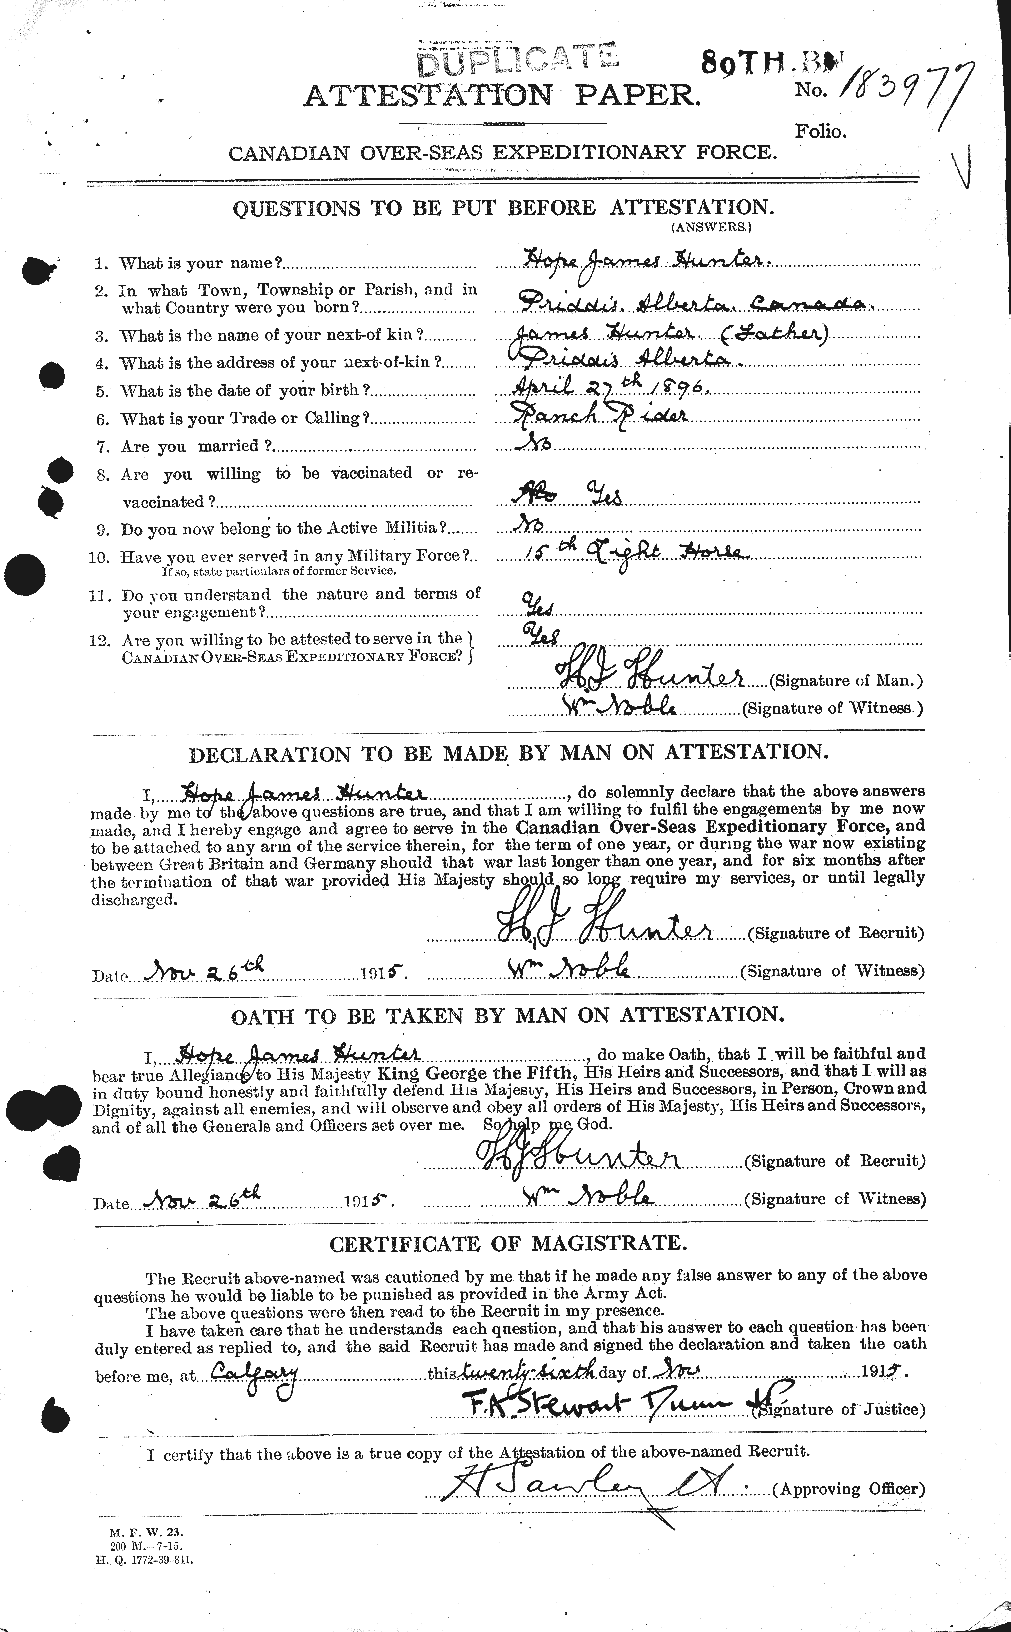 Personnel Records of the First World War - CEF 409207a